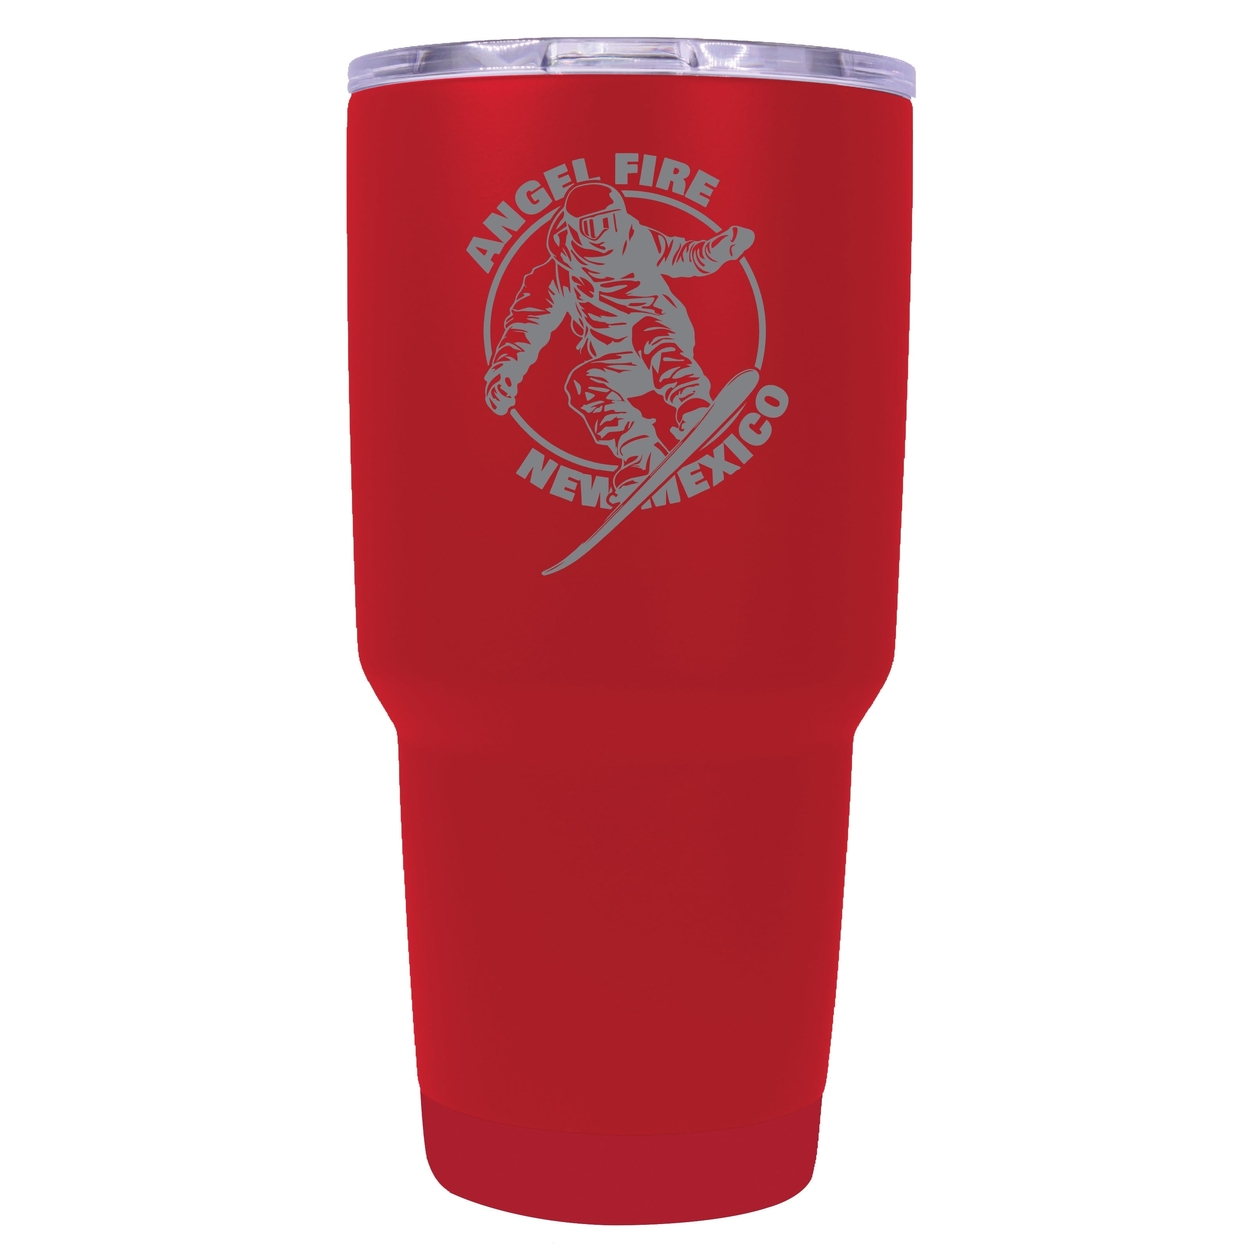 Angel Fire New Mexico Souvenir 24 Oz Engraved Insulated Stainless Steel Tumbler - Red,,4-Pack